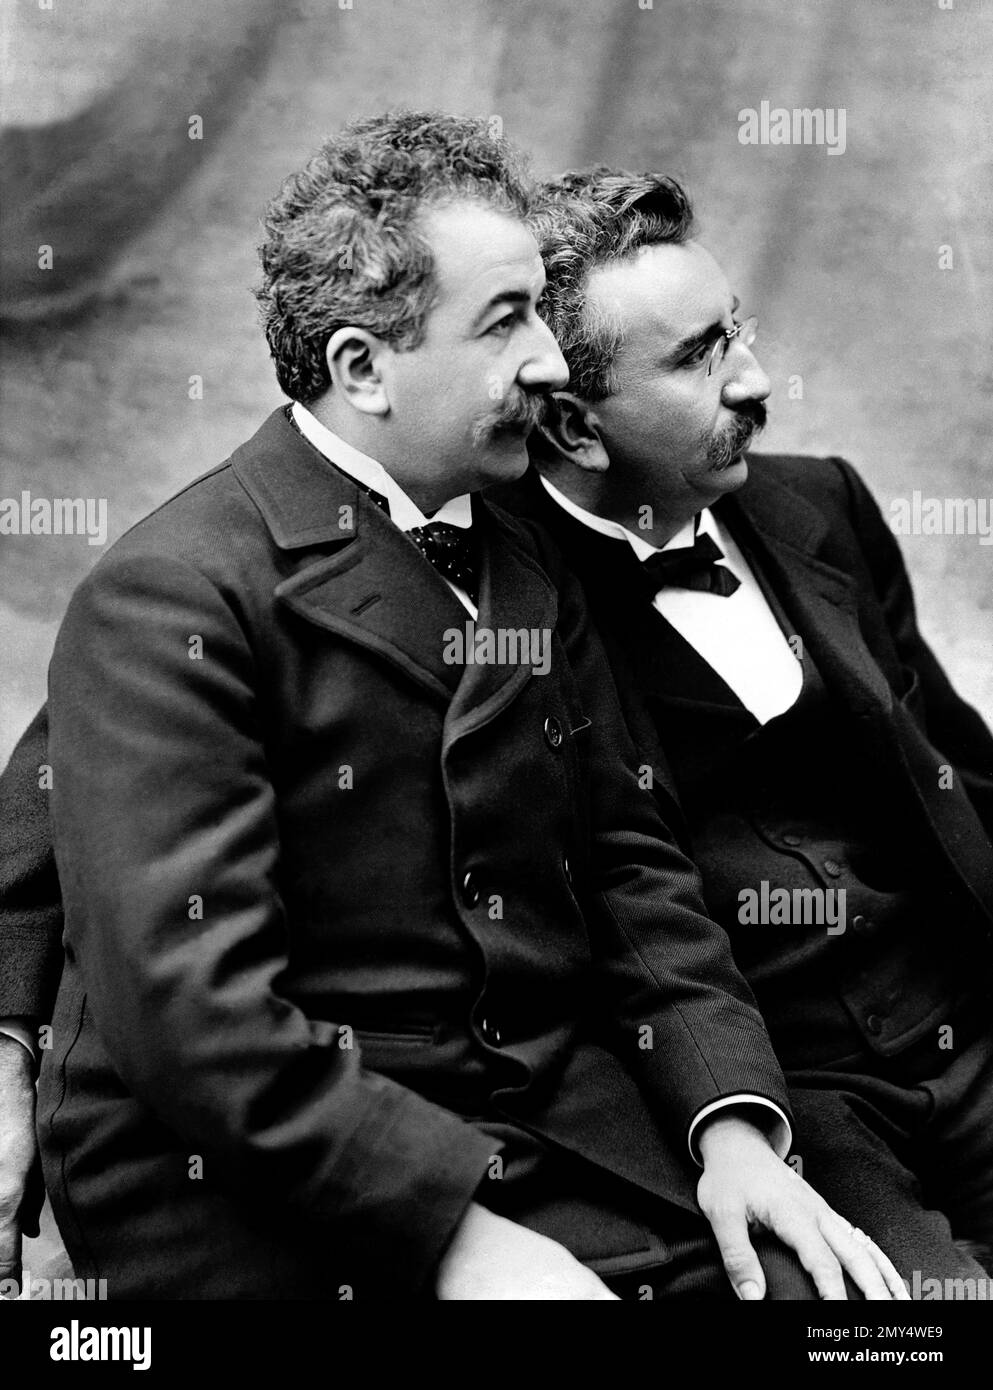 The Lumiere Brothers. Portrait of The Lumière brothers, Auguste Marie Louis Nicolas Lumière (1862-1954) and Louis Jean Lumière (1864-1948). Auguste is on the left, Louis on the right. Stock Photo